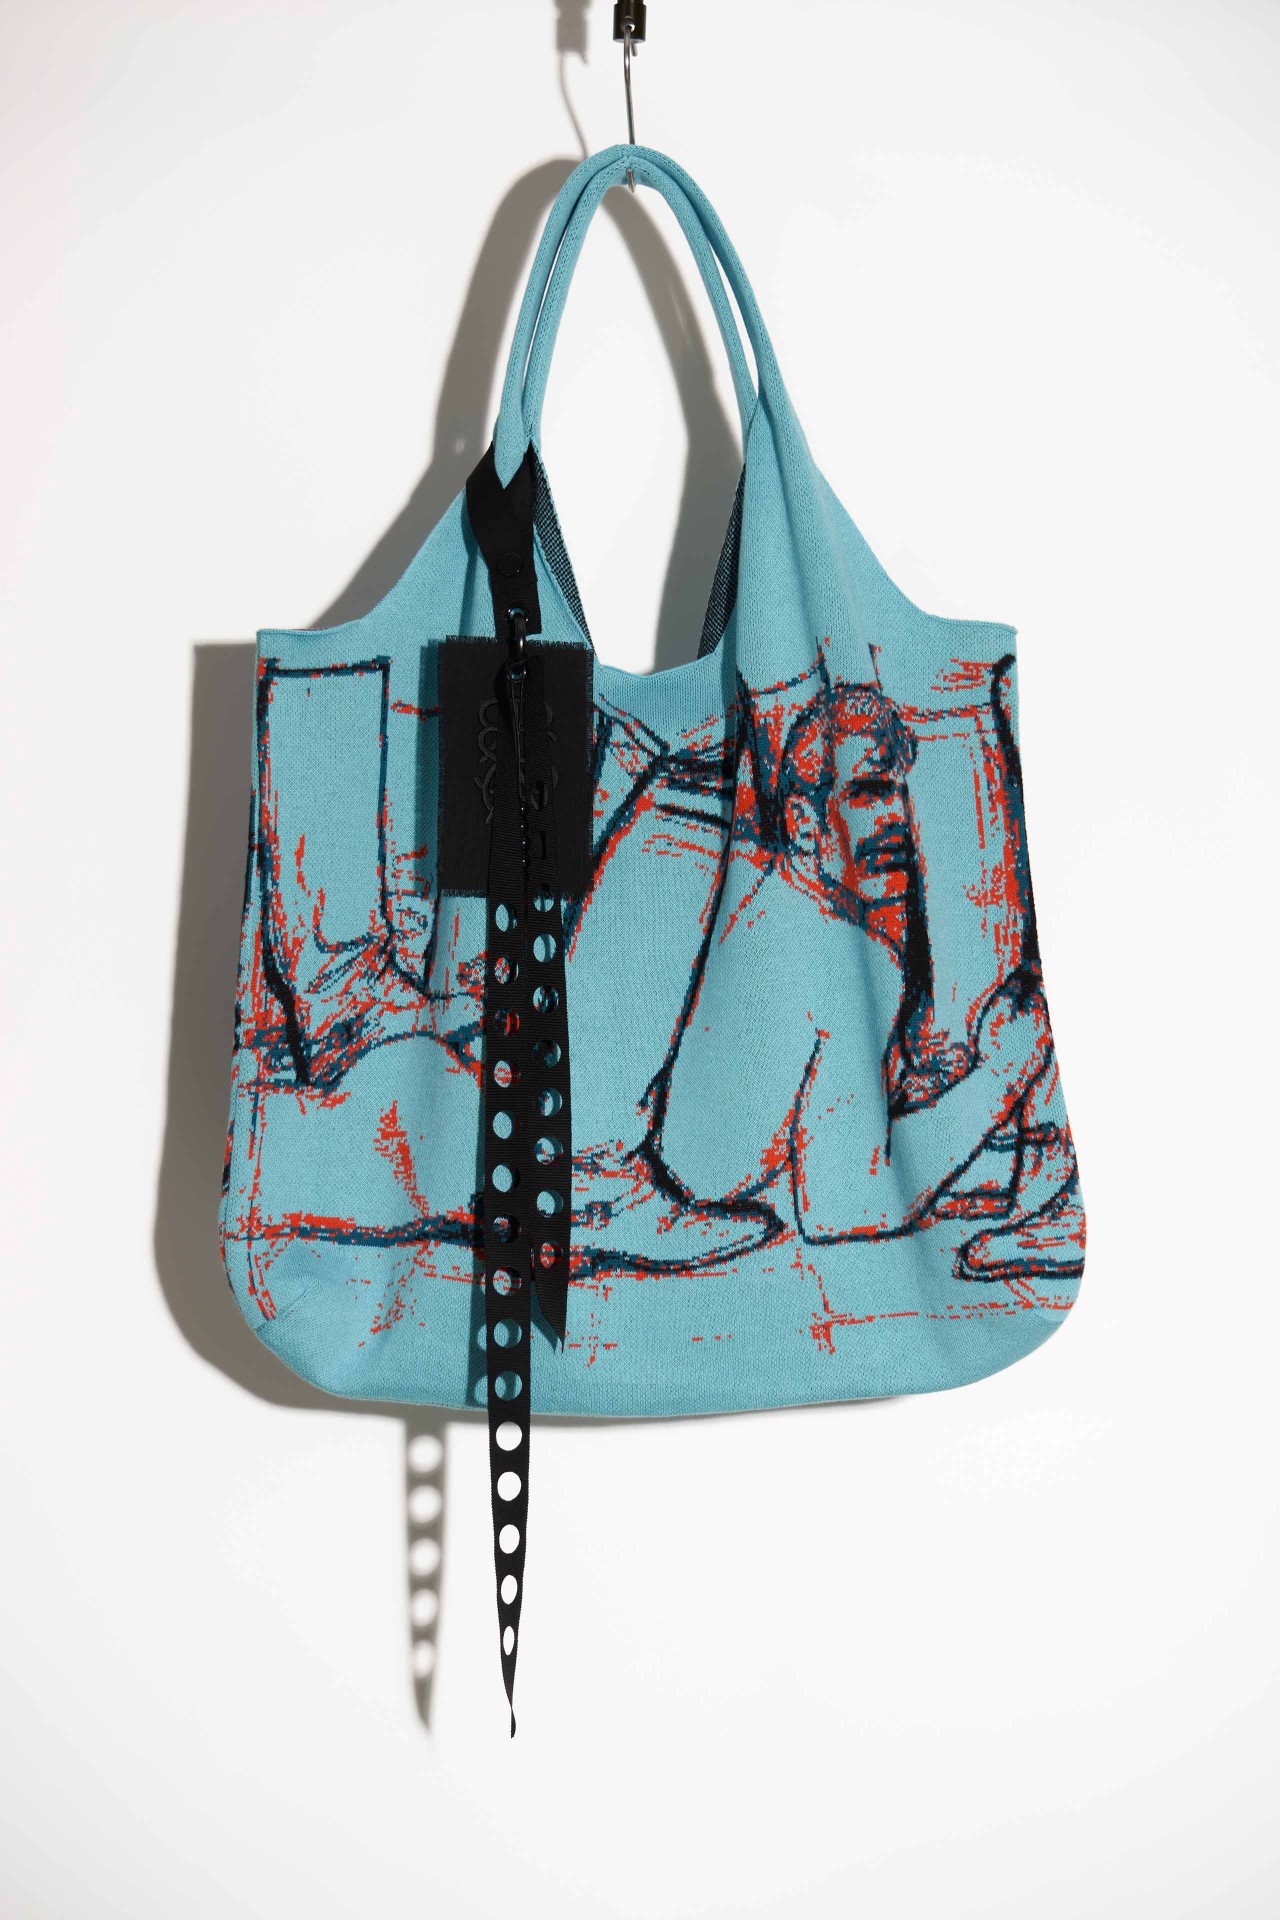 ALL+ 1982 BLUE TOTE